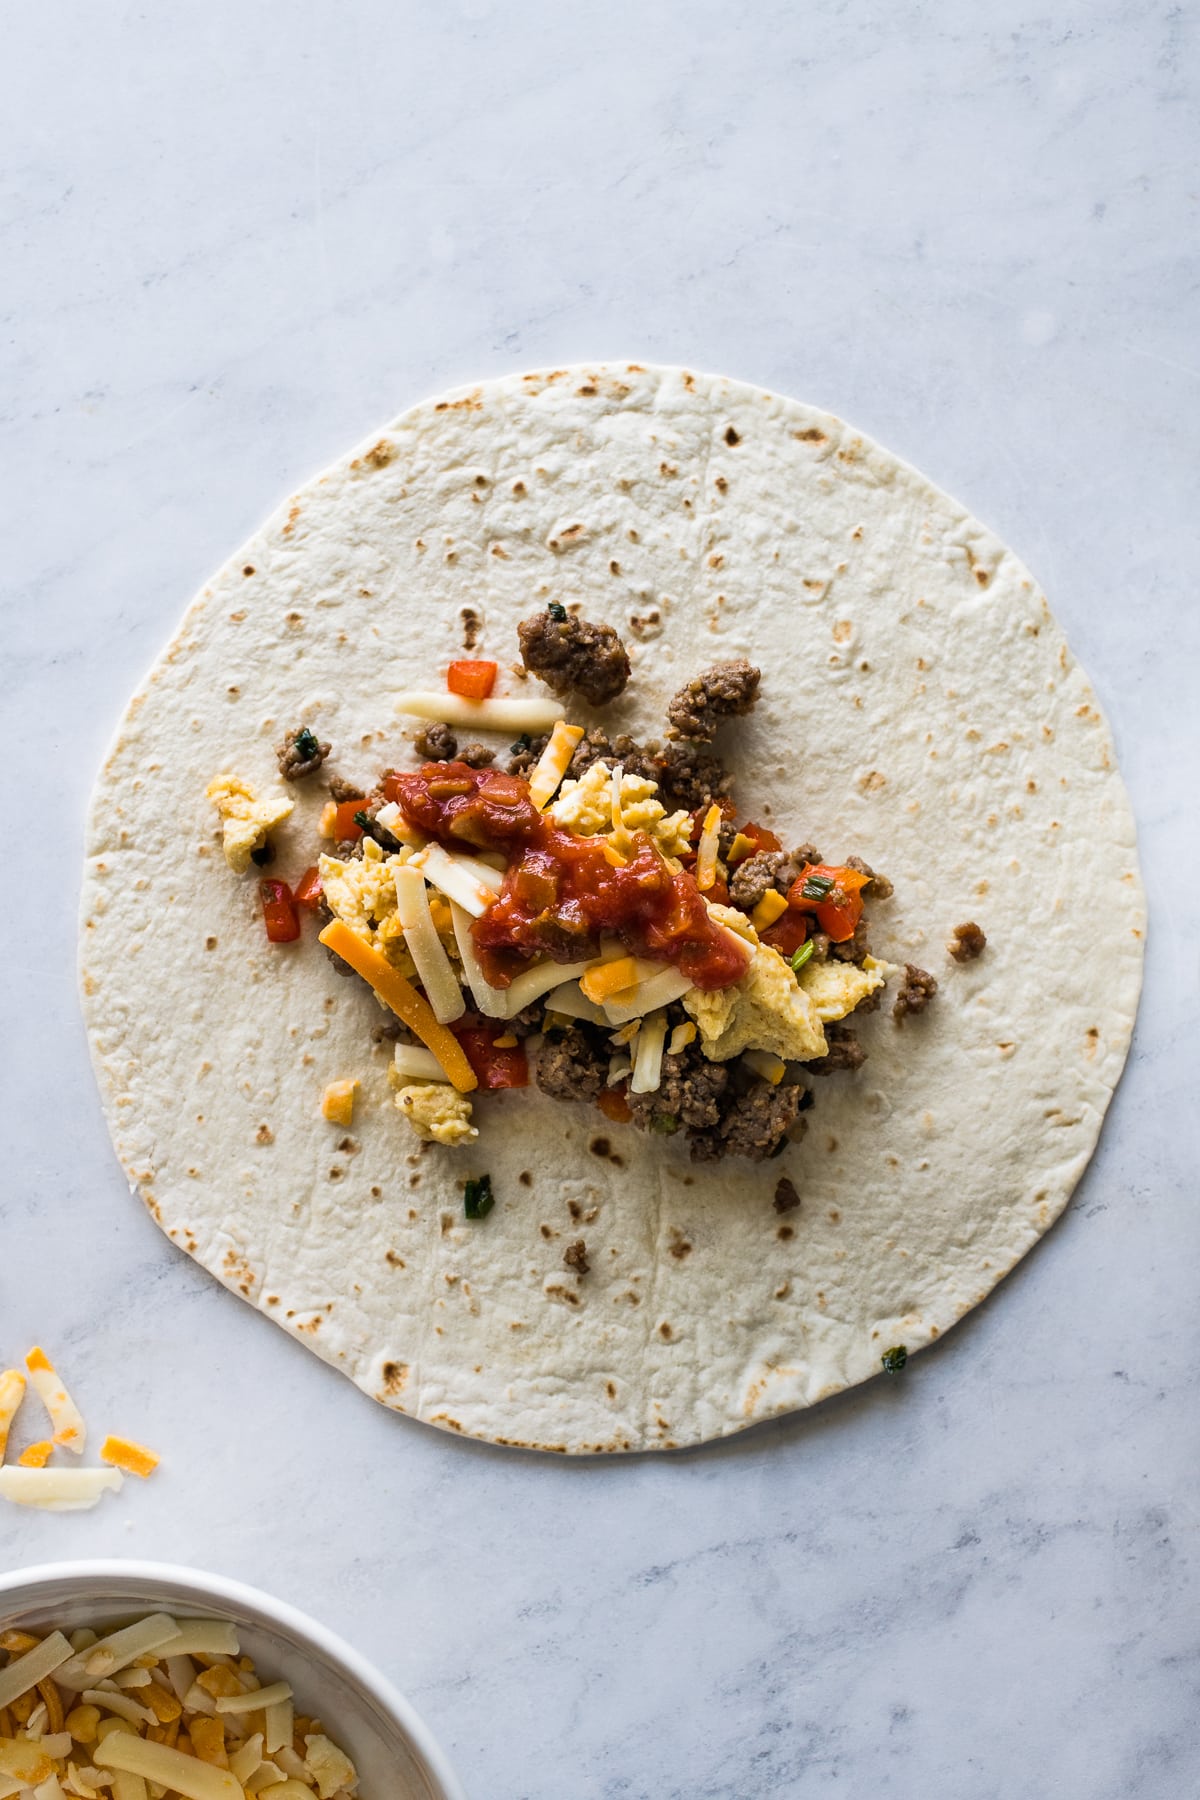 A flour tortilla with breakfast sausage, scrambled eggs, salsa, and cheese.